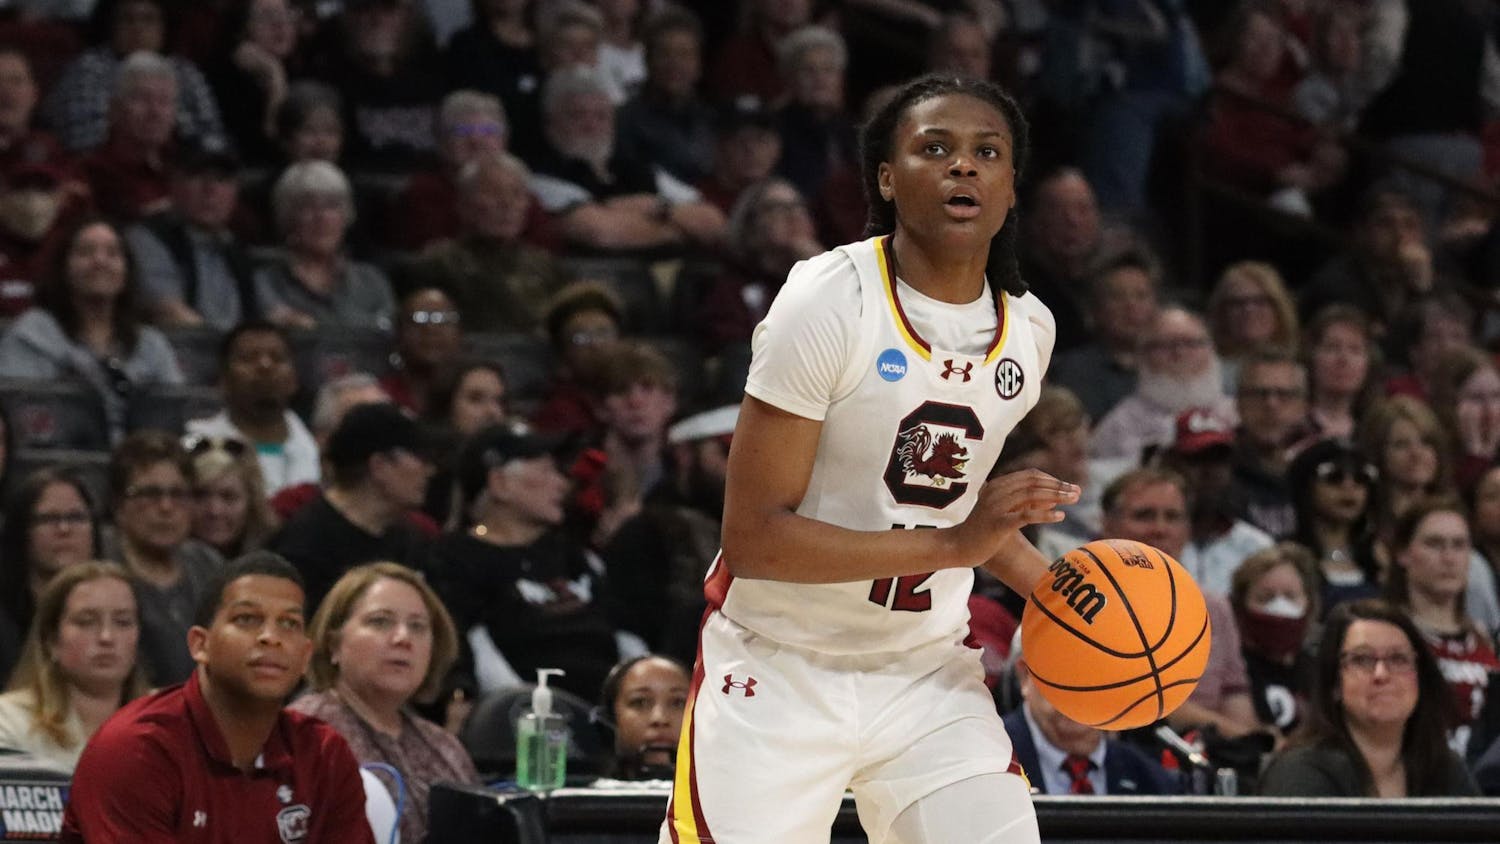 Freshman guard MiLaysia Fulwiley prepares to shoot in South Carolina's second-round game against North Carolina in the 2024 NCAA Women’s Tournament on March 24, 2024. Fulwiley scored 20 points in the Gamecocks’ 88-41 win over the Tar Heels.